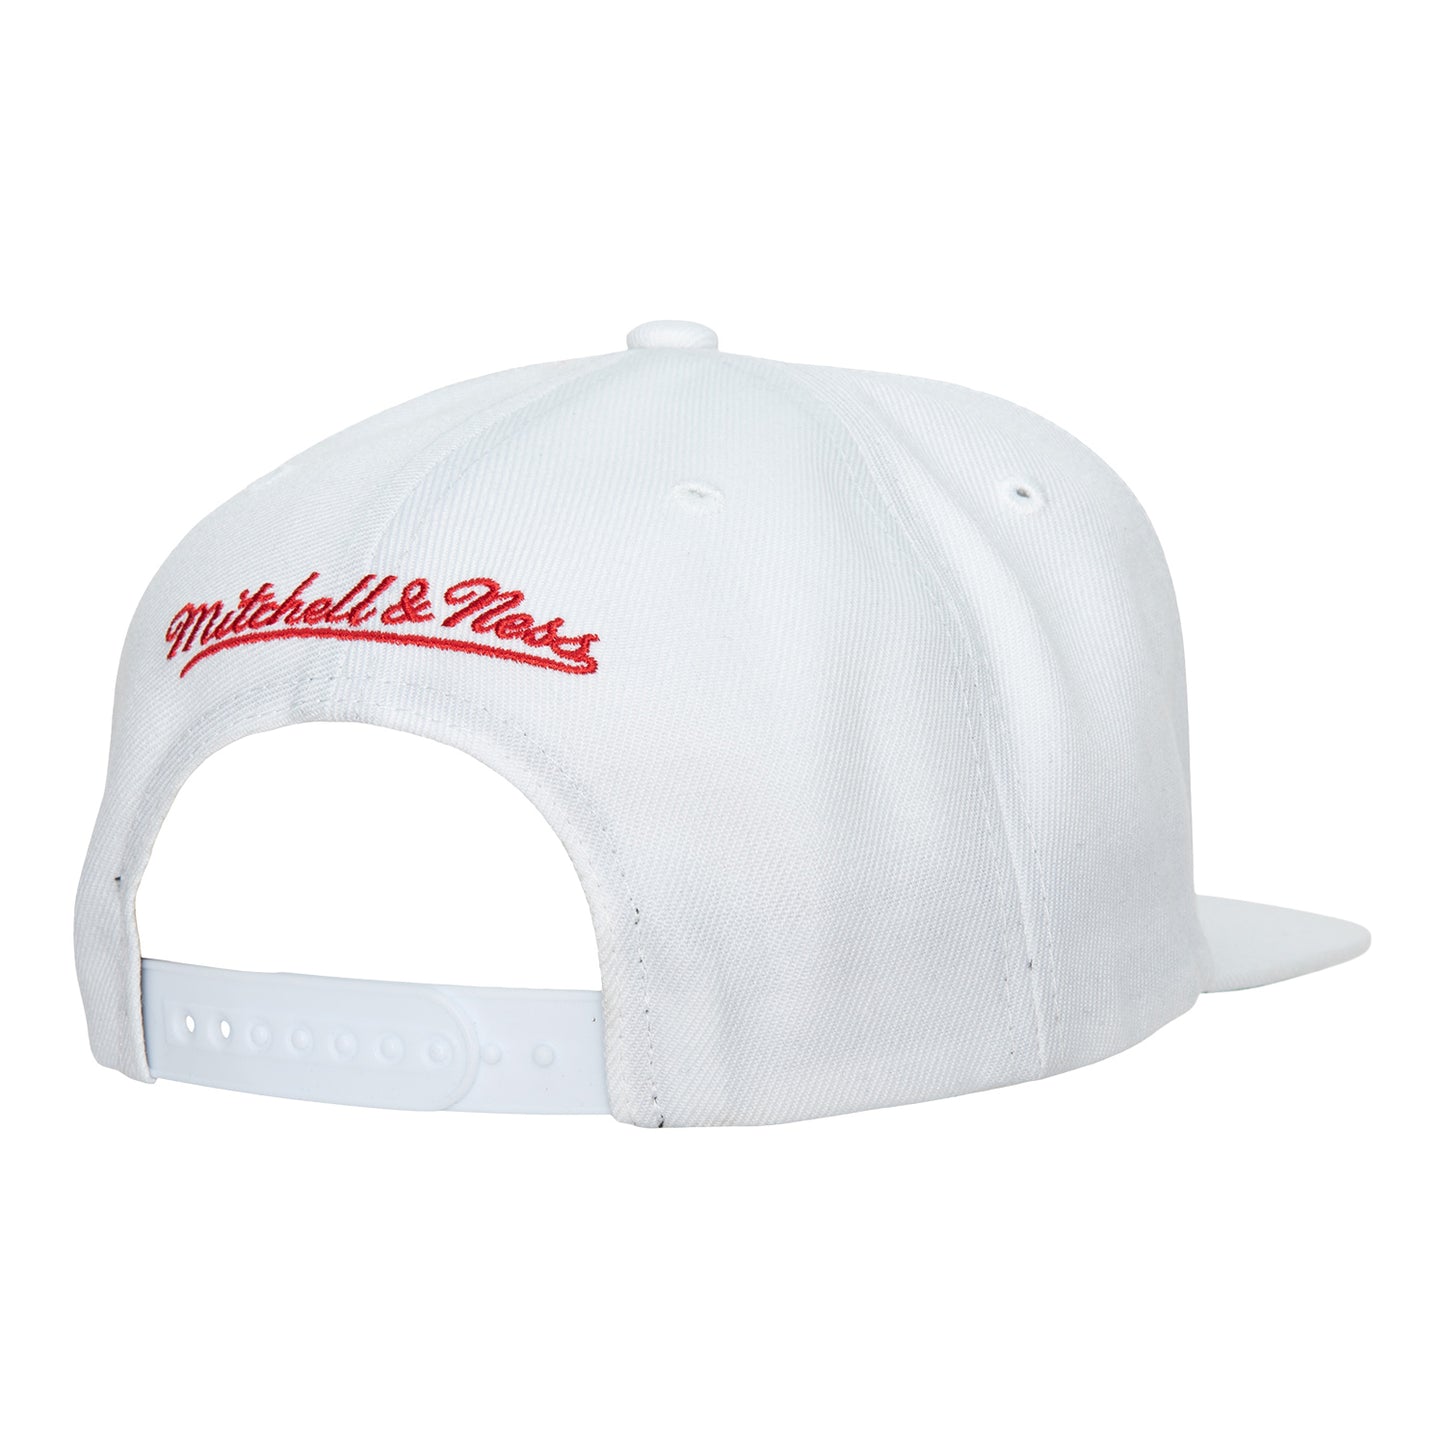 Chicago Bulls '91 Champs M&N Snapback in white - back view